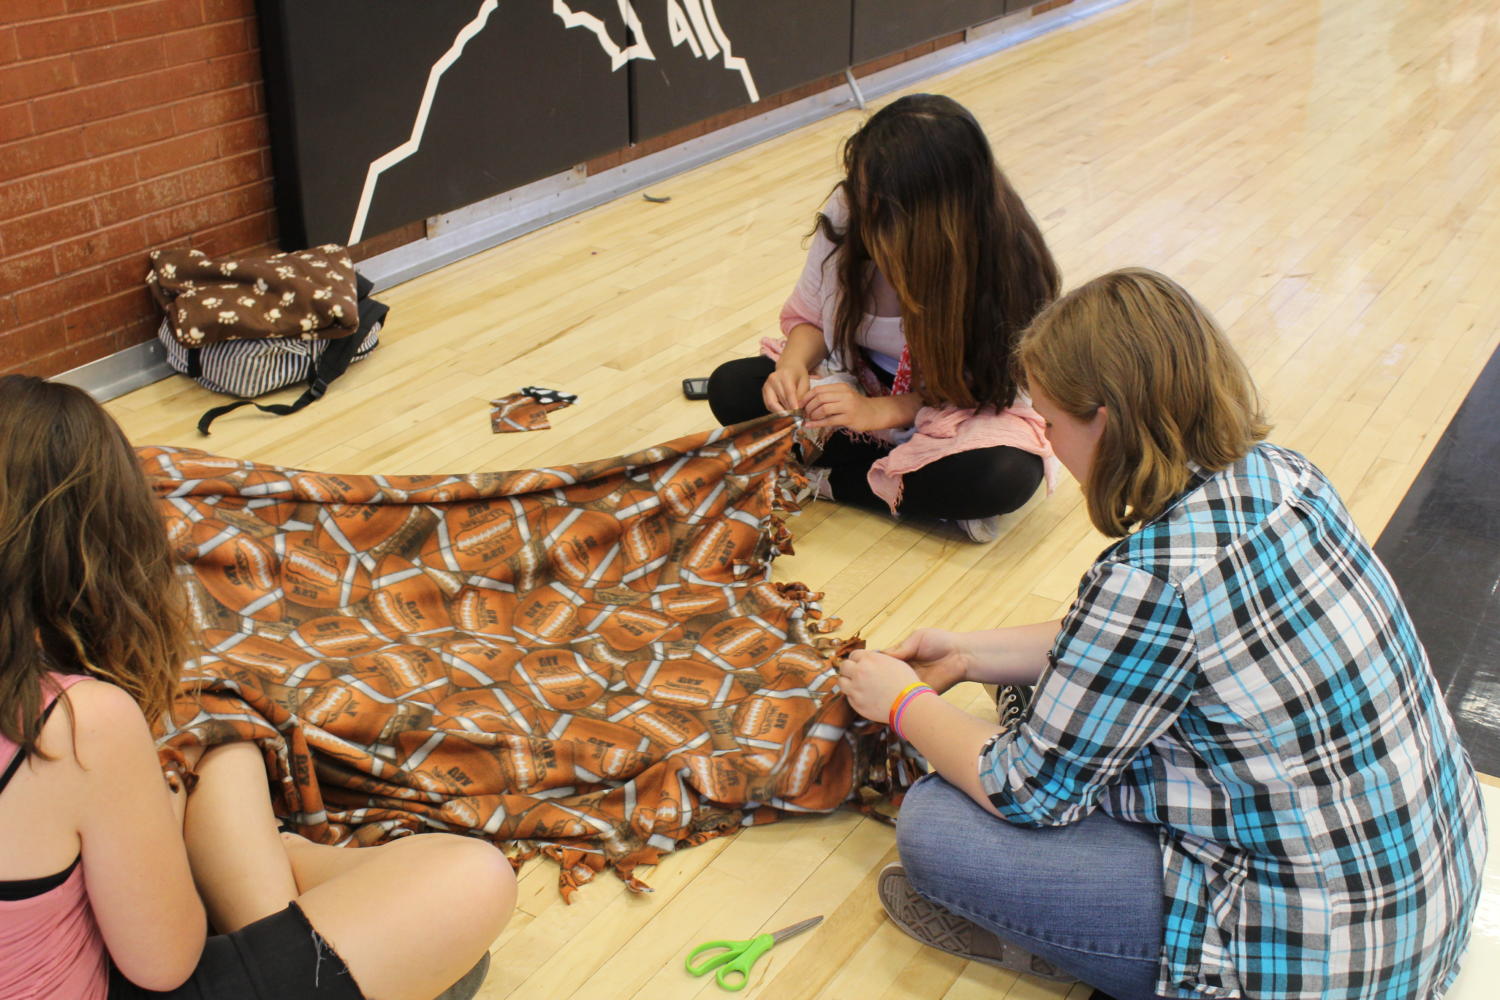 Students tie blankets for charity.